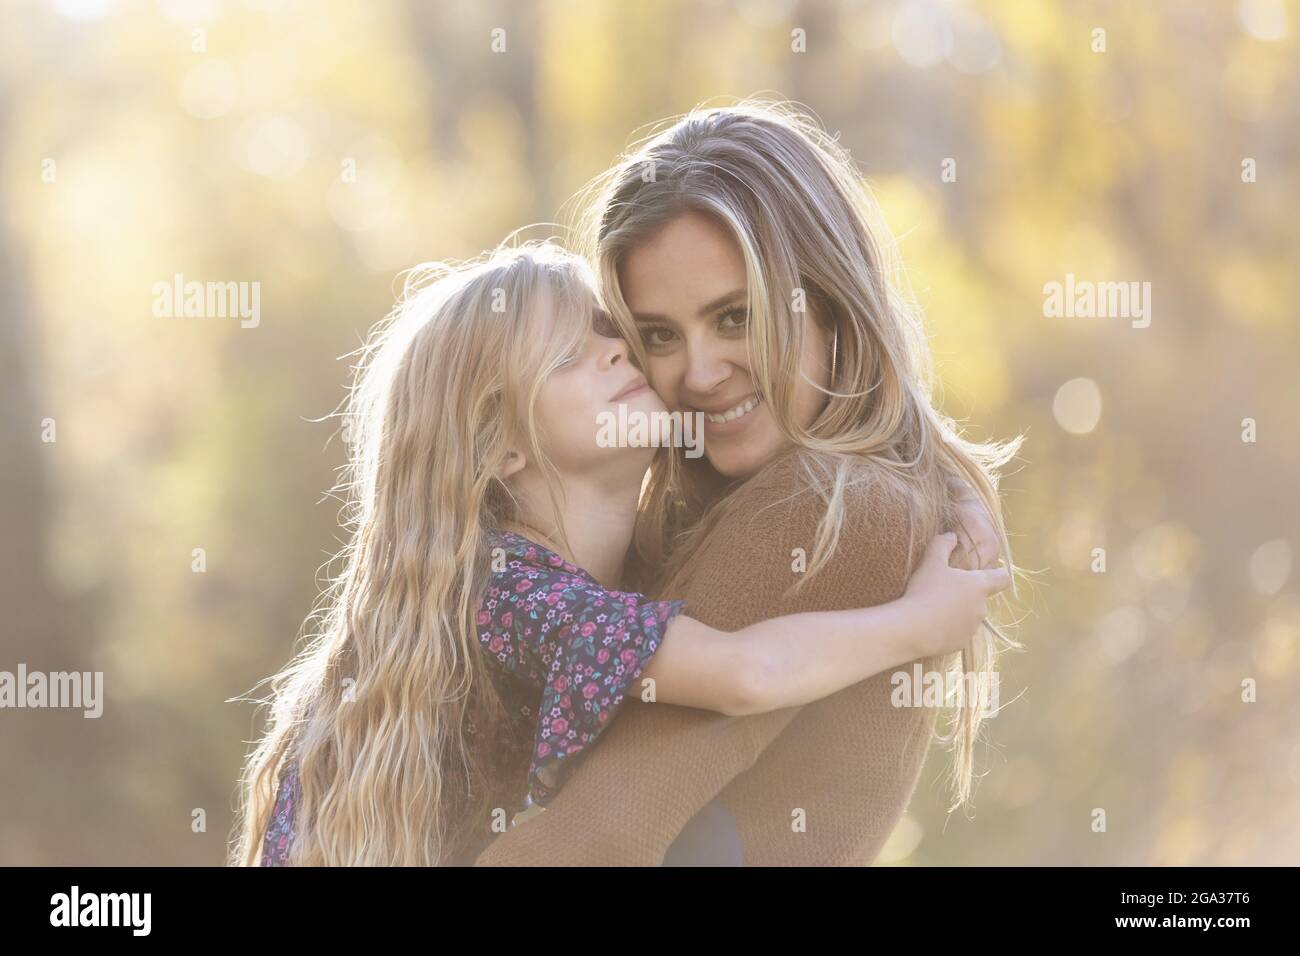 A mother spending quality time with her young daughter, outdoors in a city park; Edmonton, Alberta, Canada Stock Photo